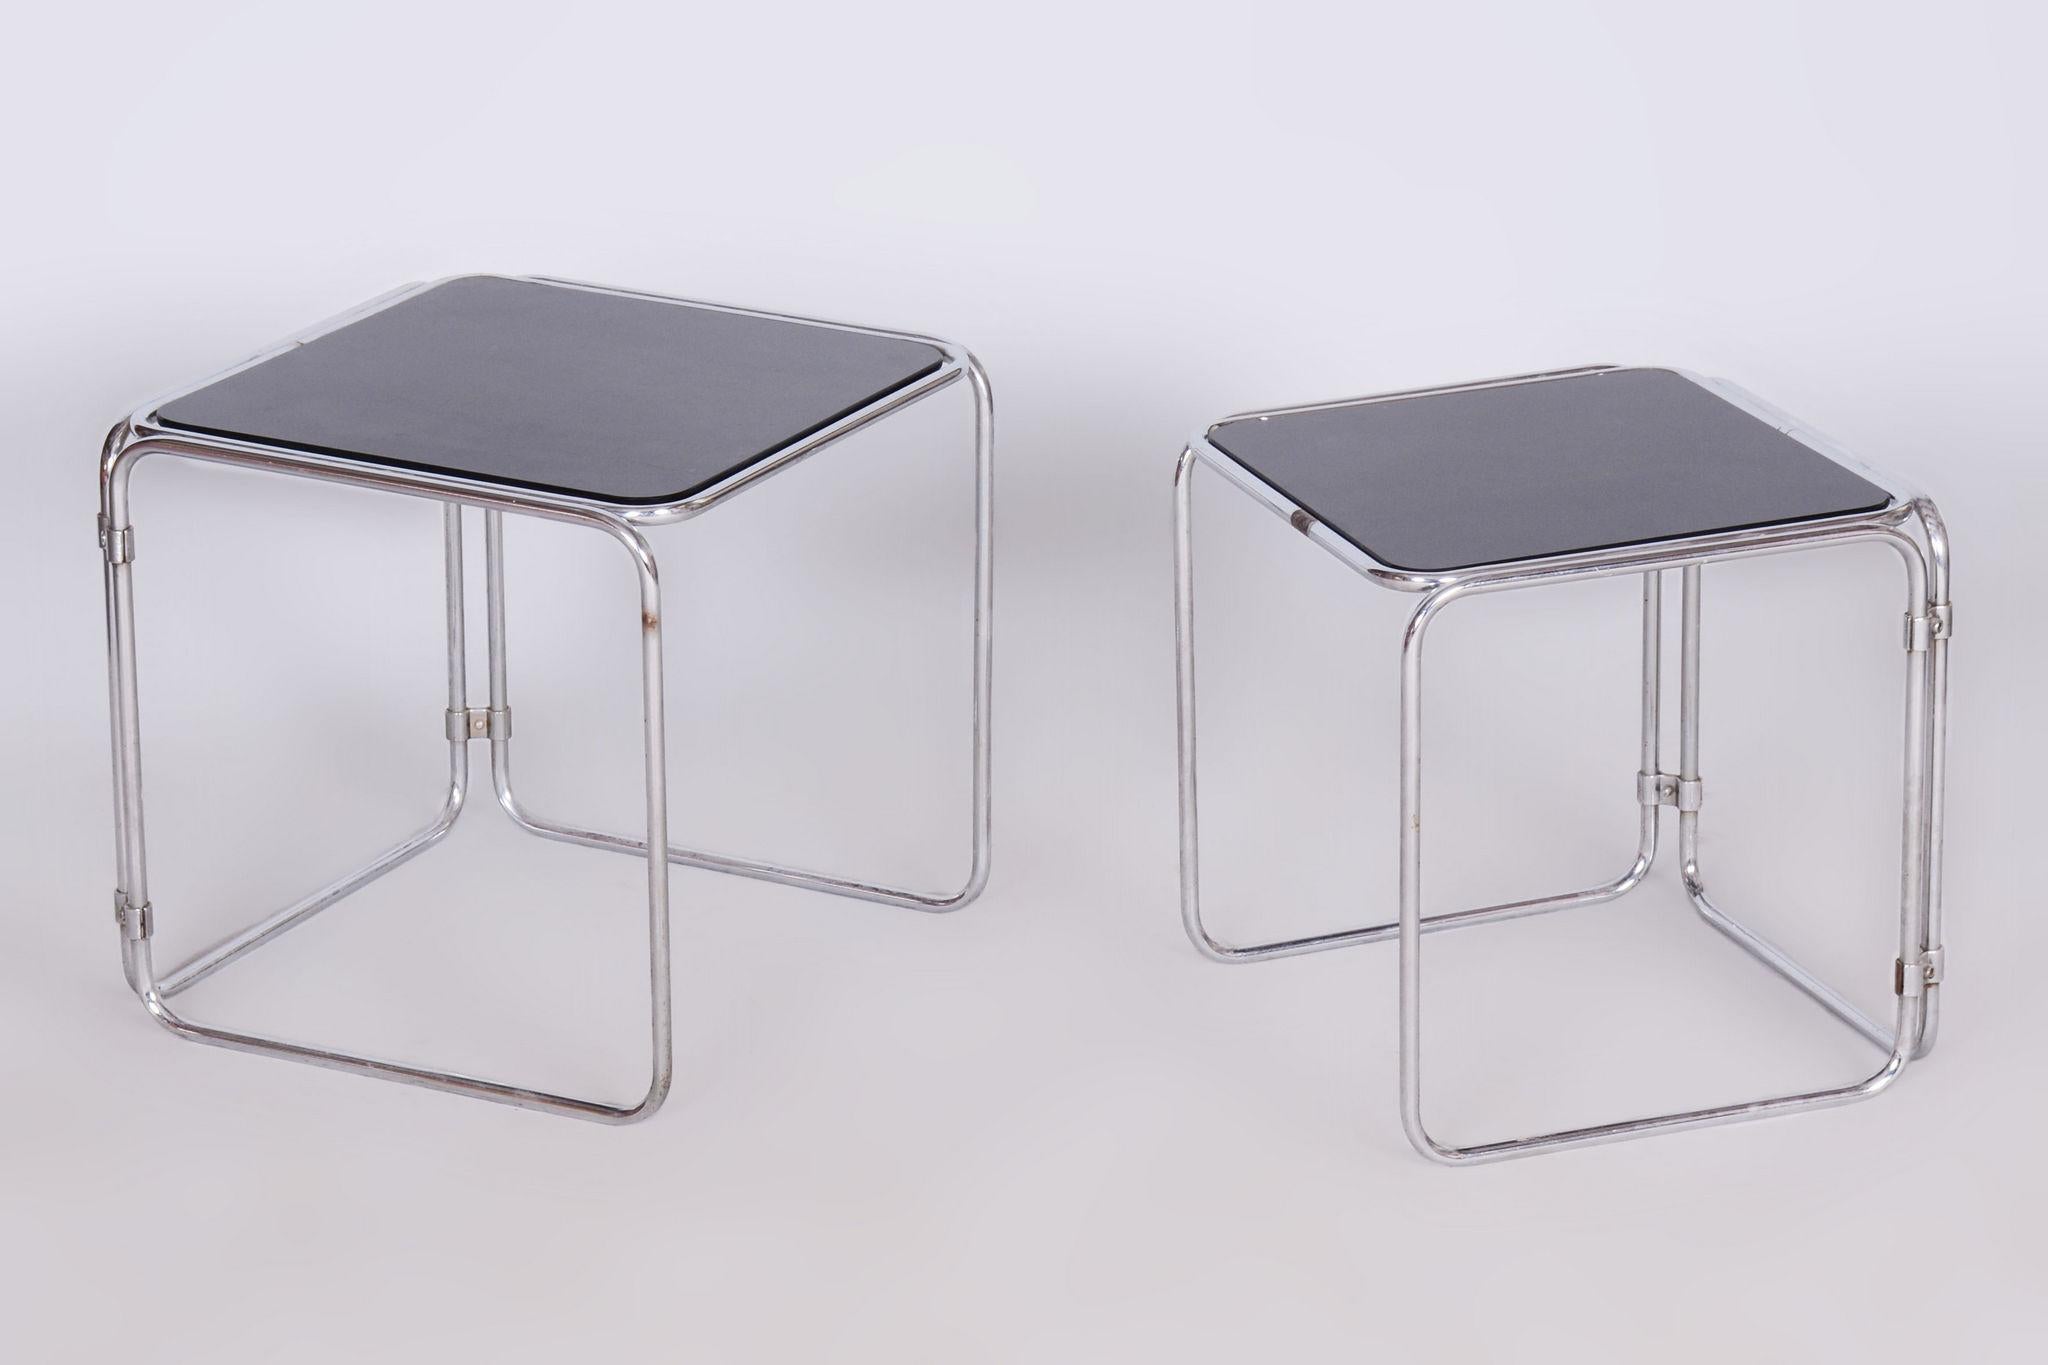 Restored Midcentury Nesting Tables, Chrome-Plated Steel, Glass, Czechia, 1960s For Sale 2